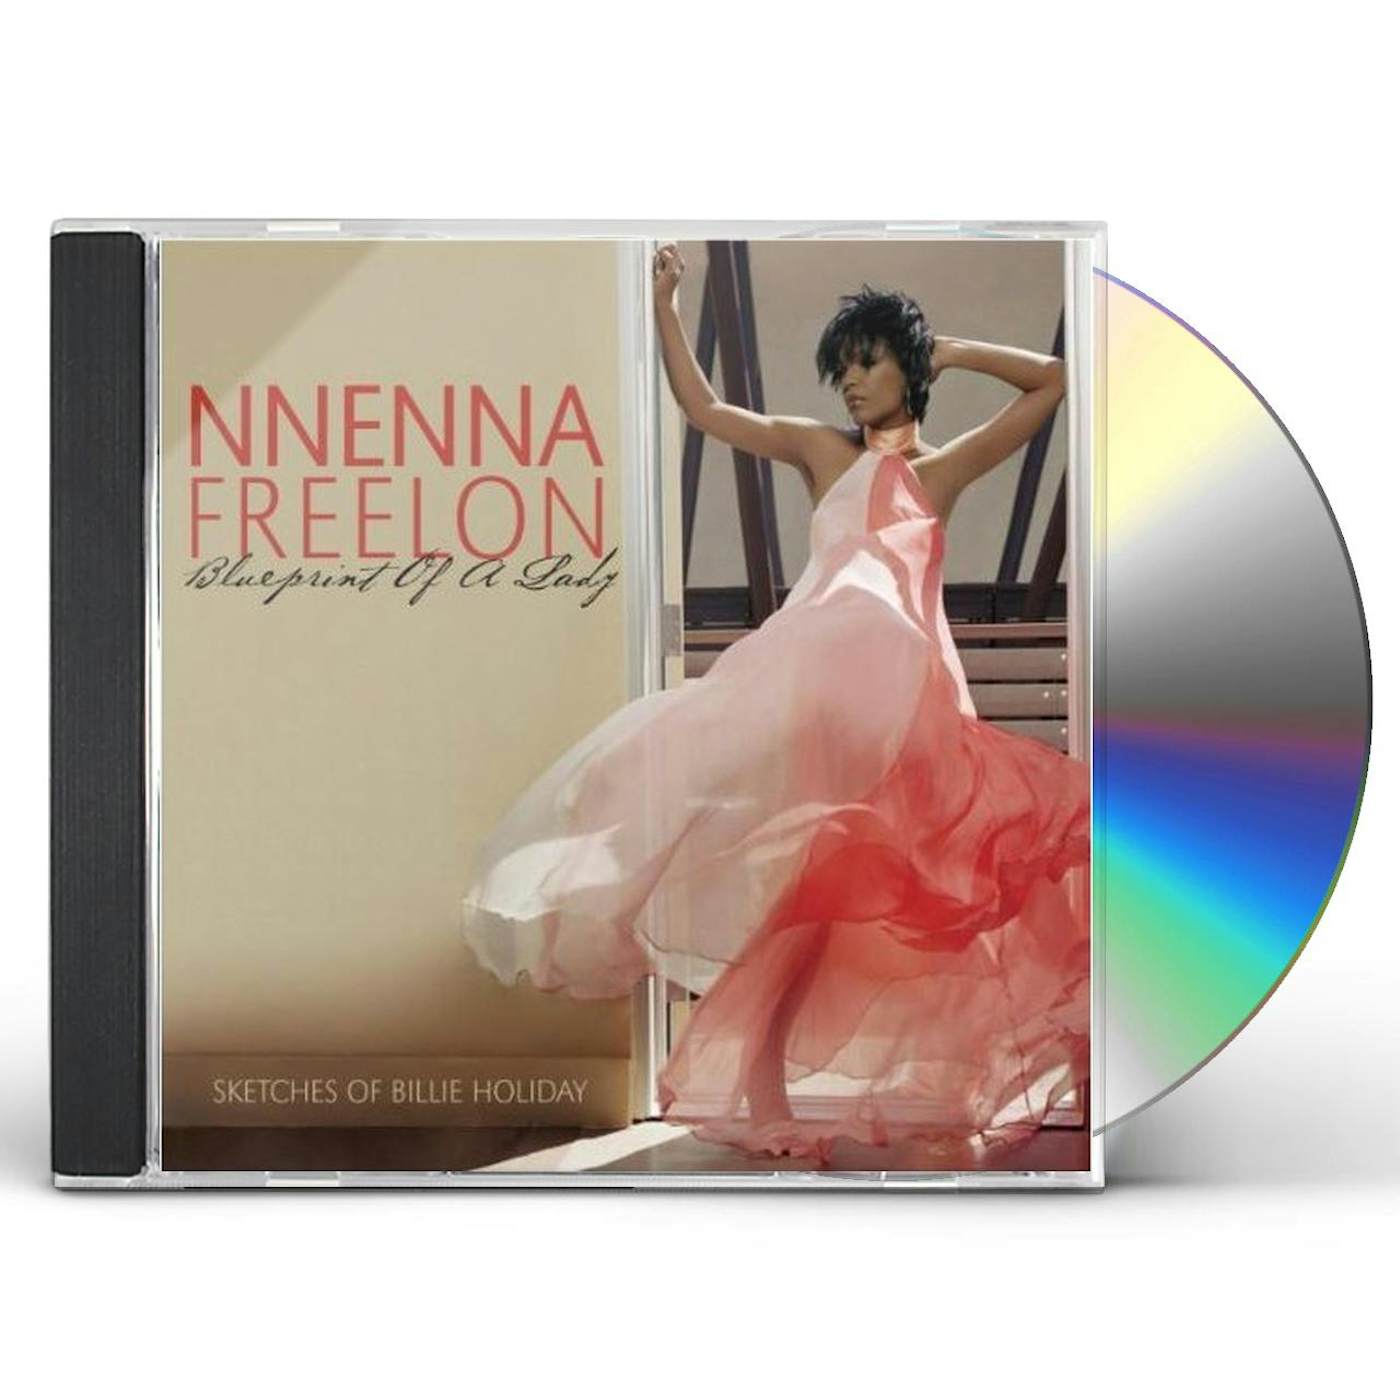 Nnenna Freelon BLUEPRINT OF A LADY: SKETCHES OF BILLIE HOLIDAY CD